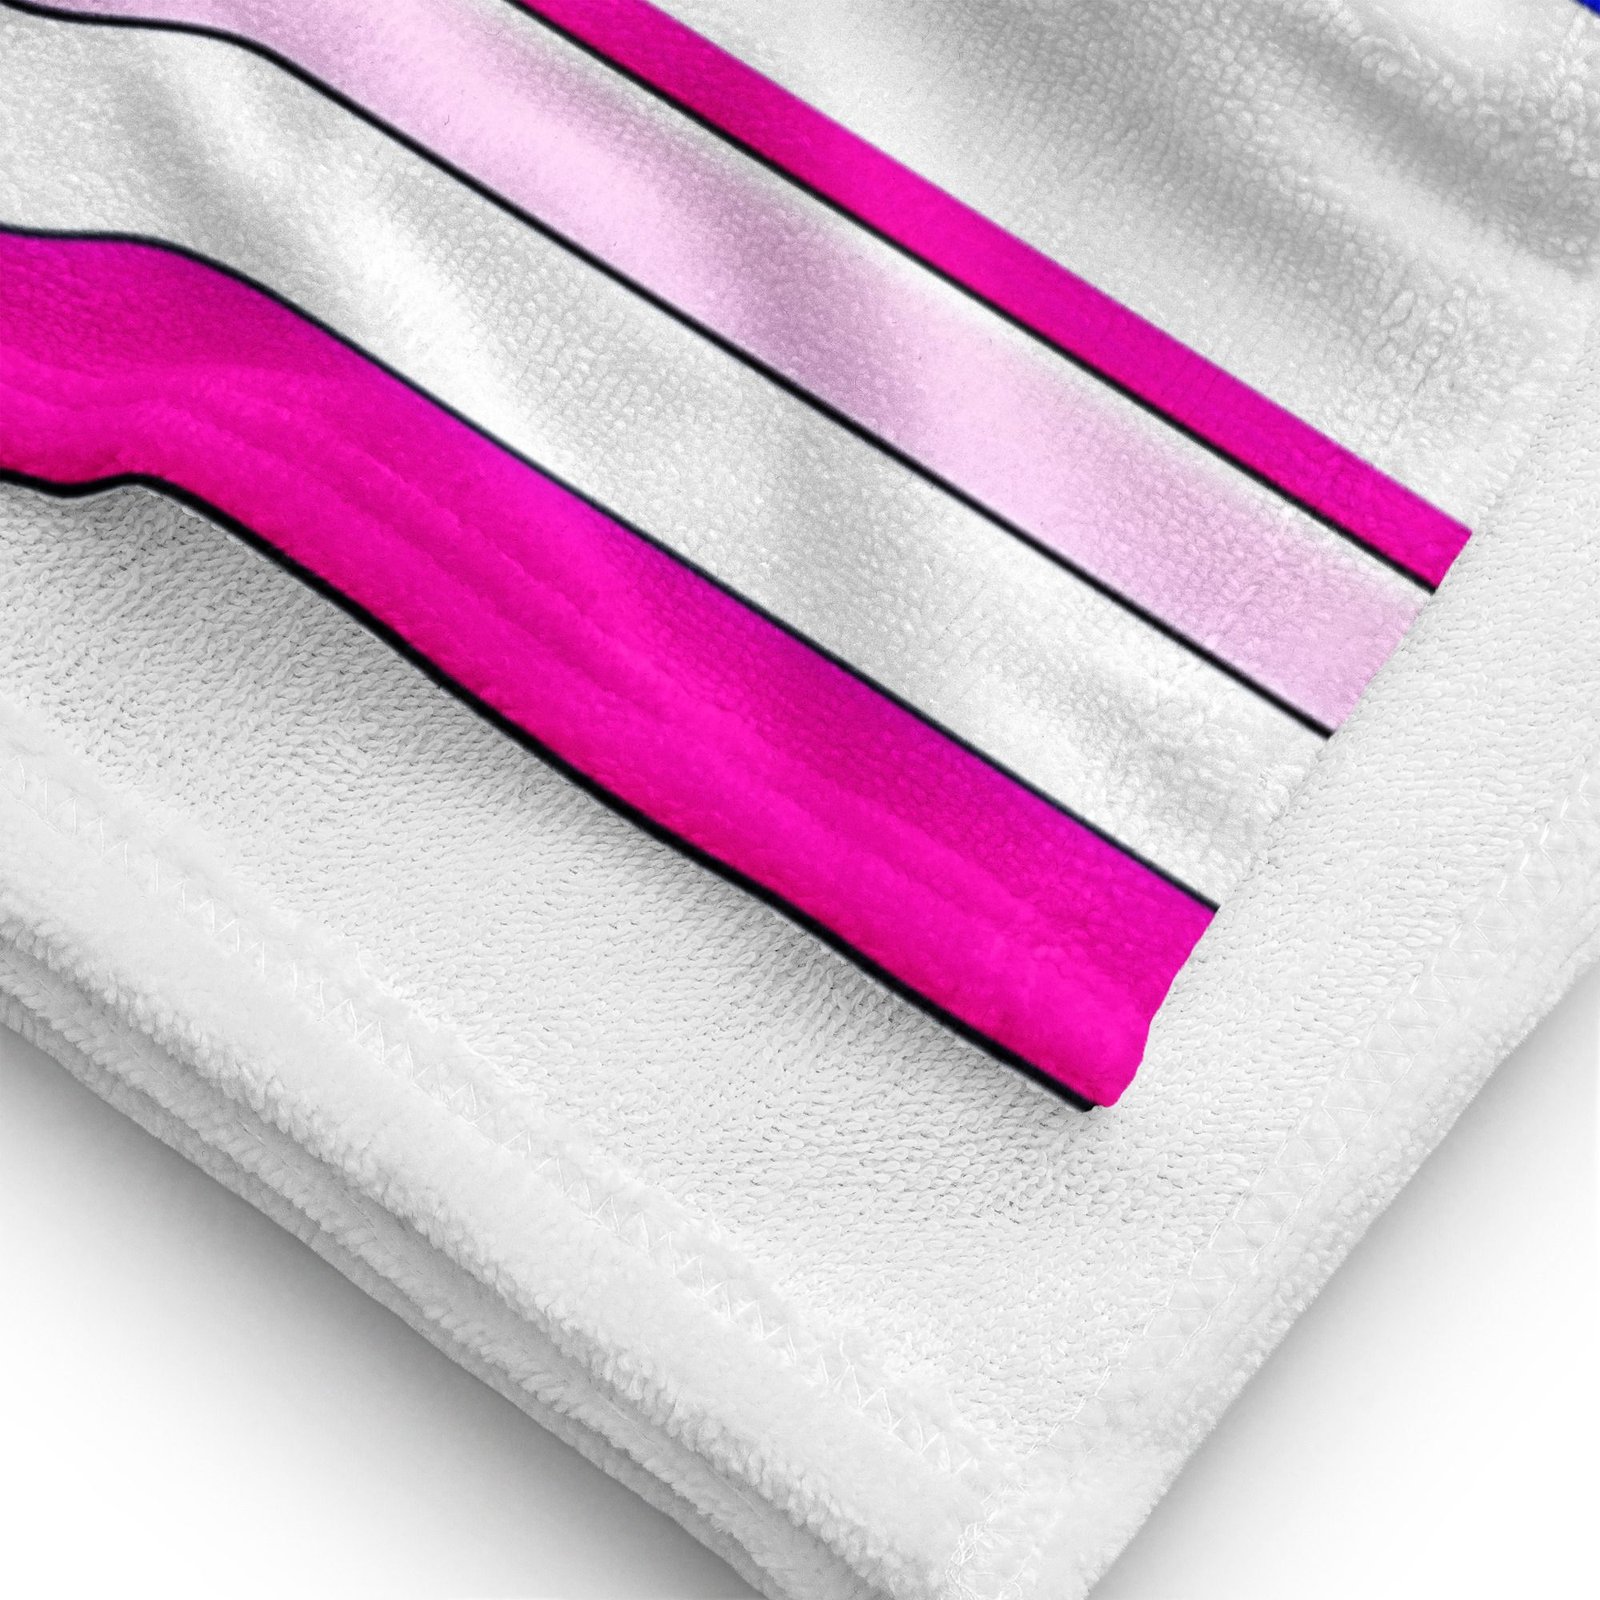 sublimated towel white 30x60 product details 64bd0bad6b7f4